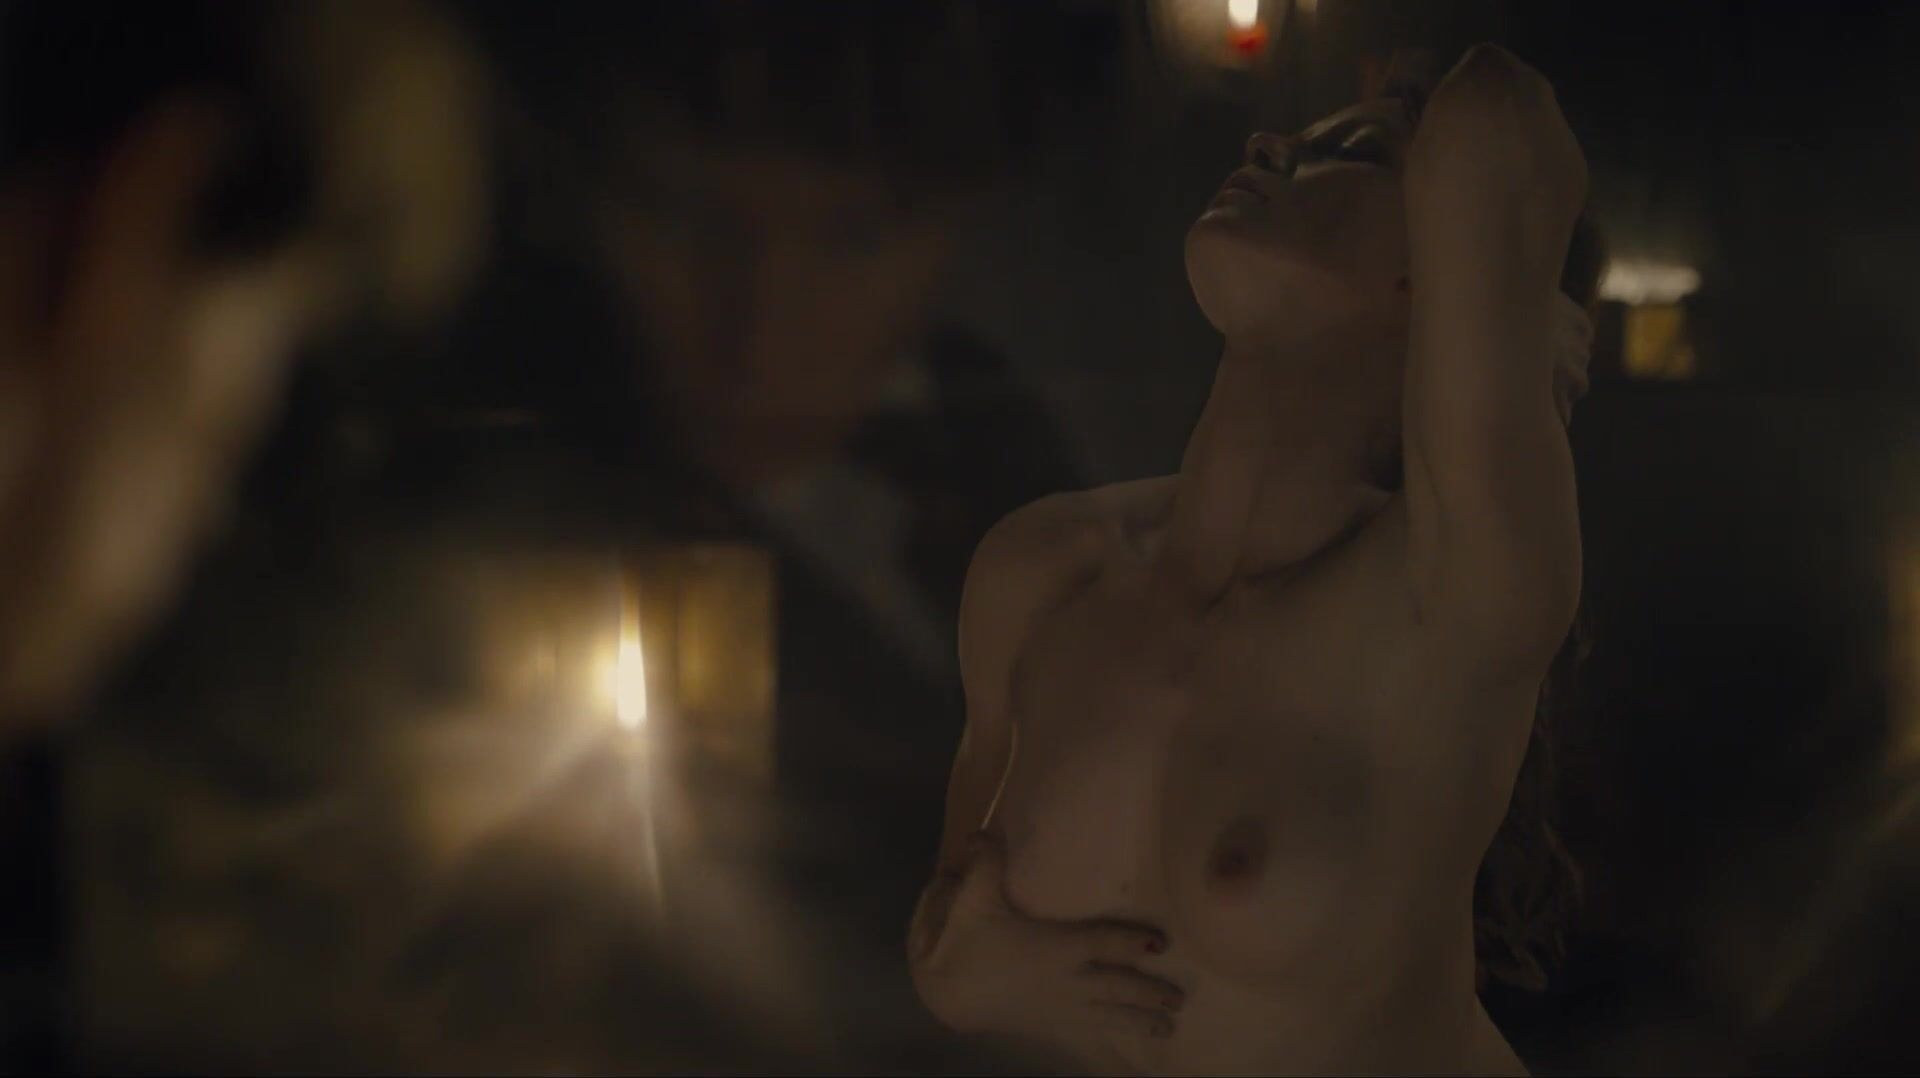 Cam Porn Director focuses on Sonya Cullingford's nice boobies showing them in The Danish Girl Corno